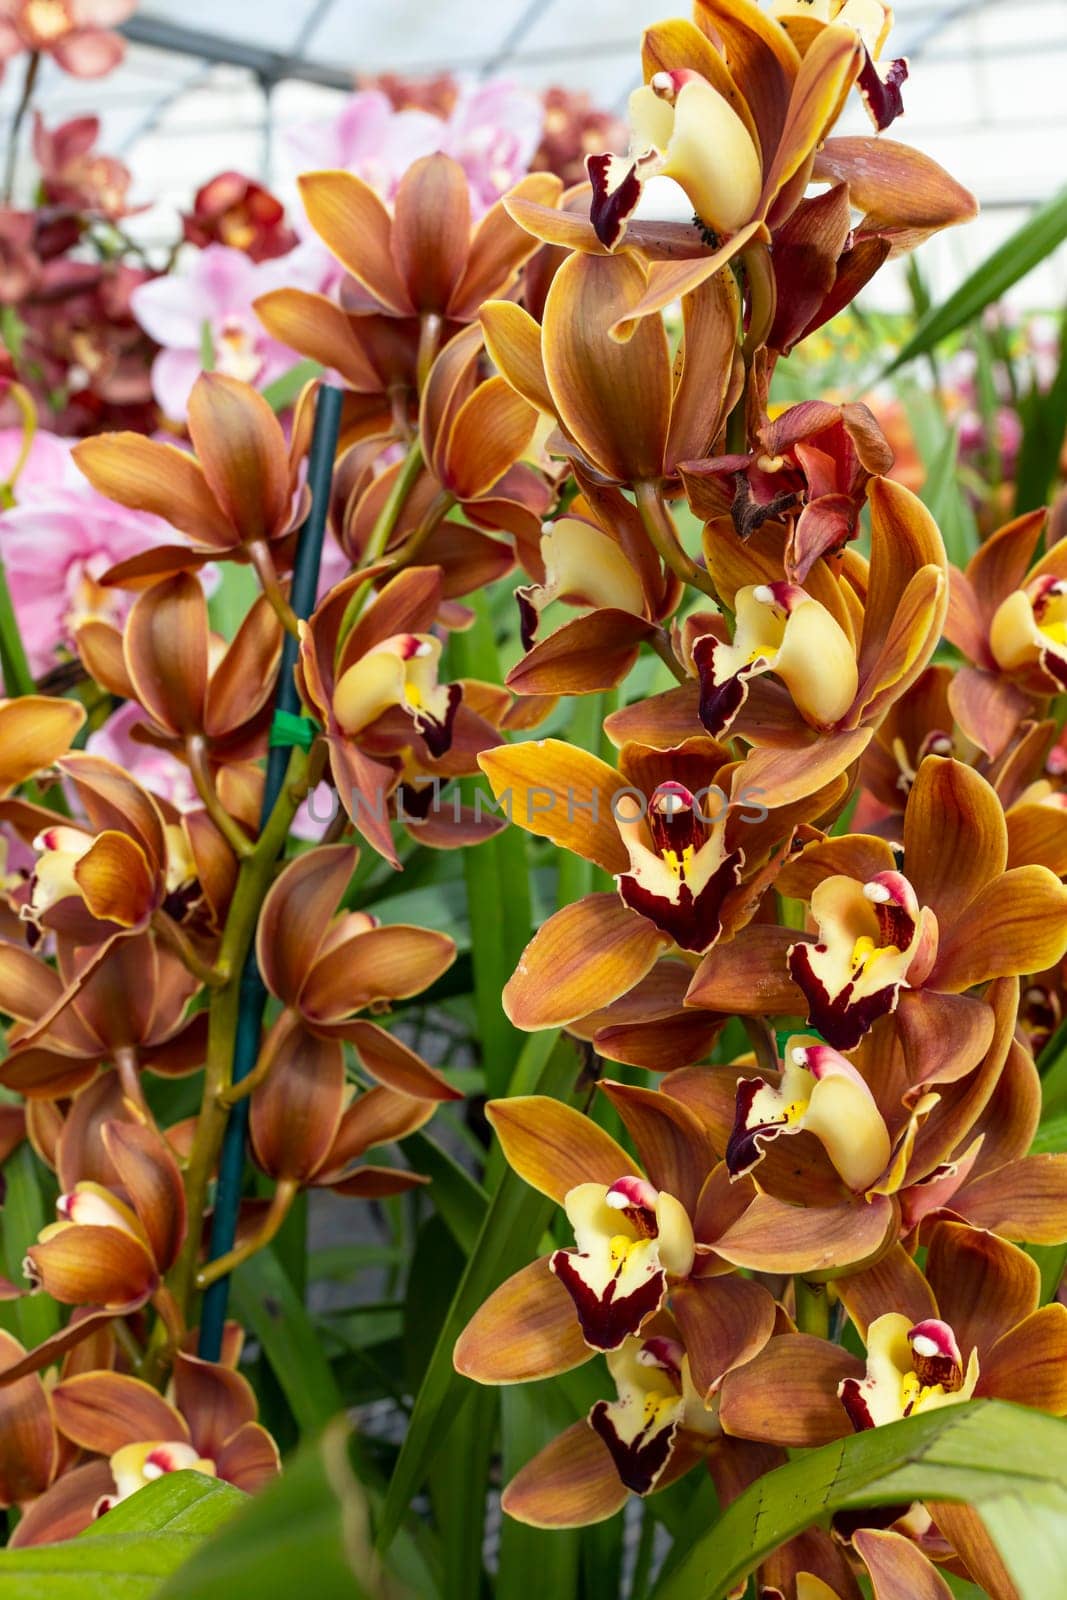 Yellow Red Cymbidiums Orchid Plant Flower in Greenhouse, family Orchidaceae. Blooming Cosmopolitan Flower with Green Leaves. Flora, Floriculture. Vertical Plane by netatsi